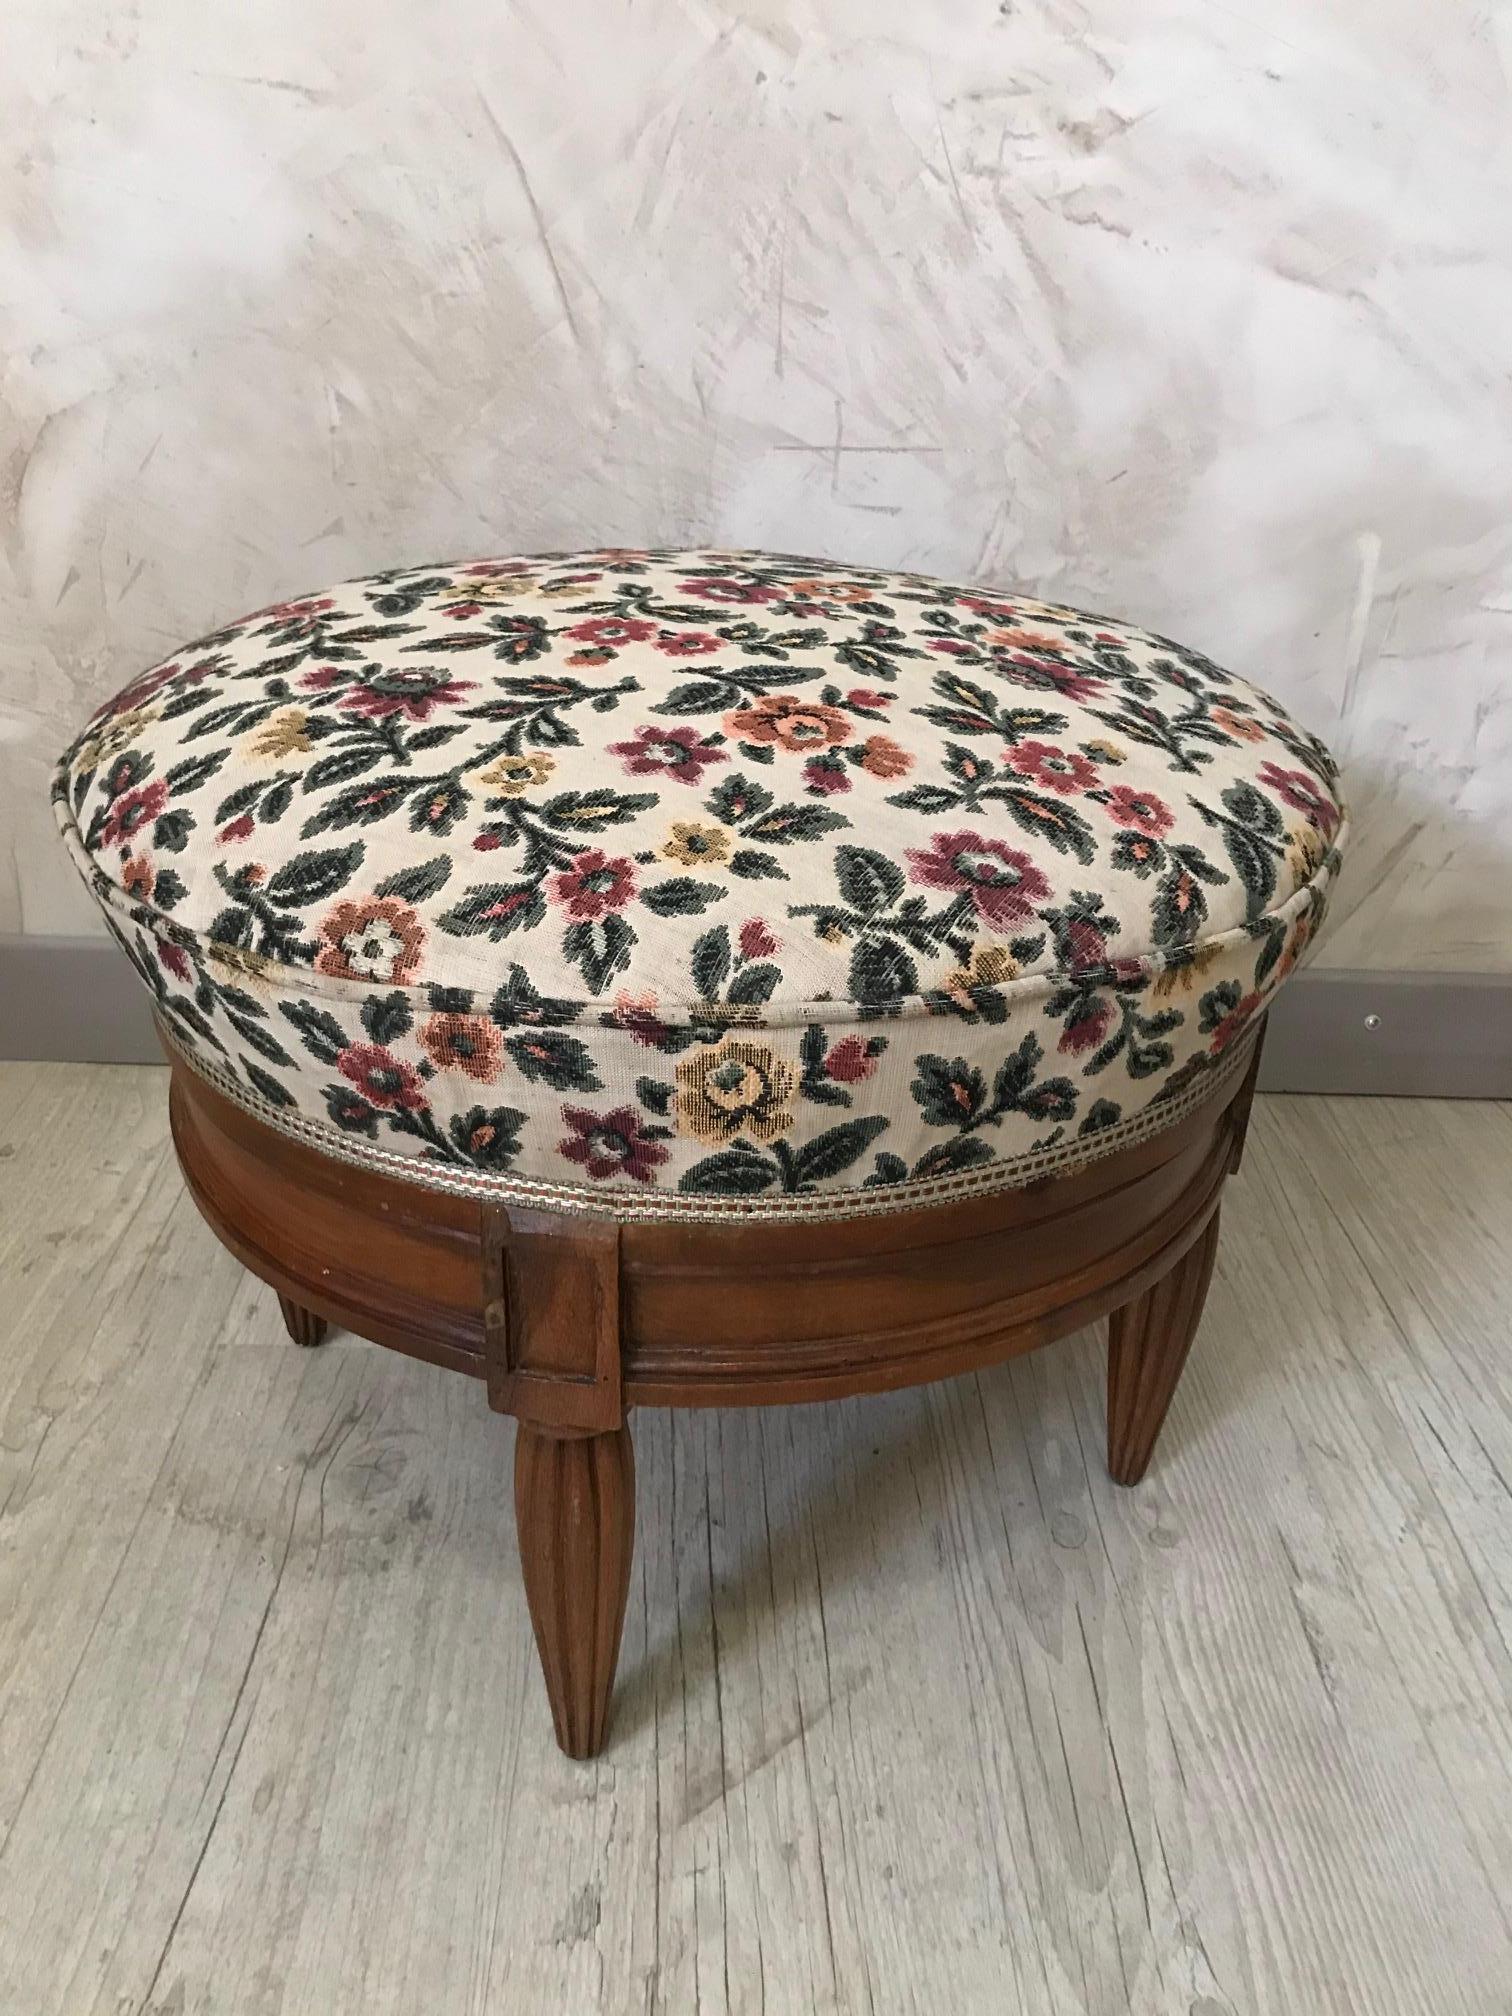 Very nice 20th century French Art Deco footstool from the 1930s.
Covered with a nice flower fabric and finish with a beautiful braid.
Very good condition and quality.